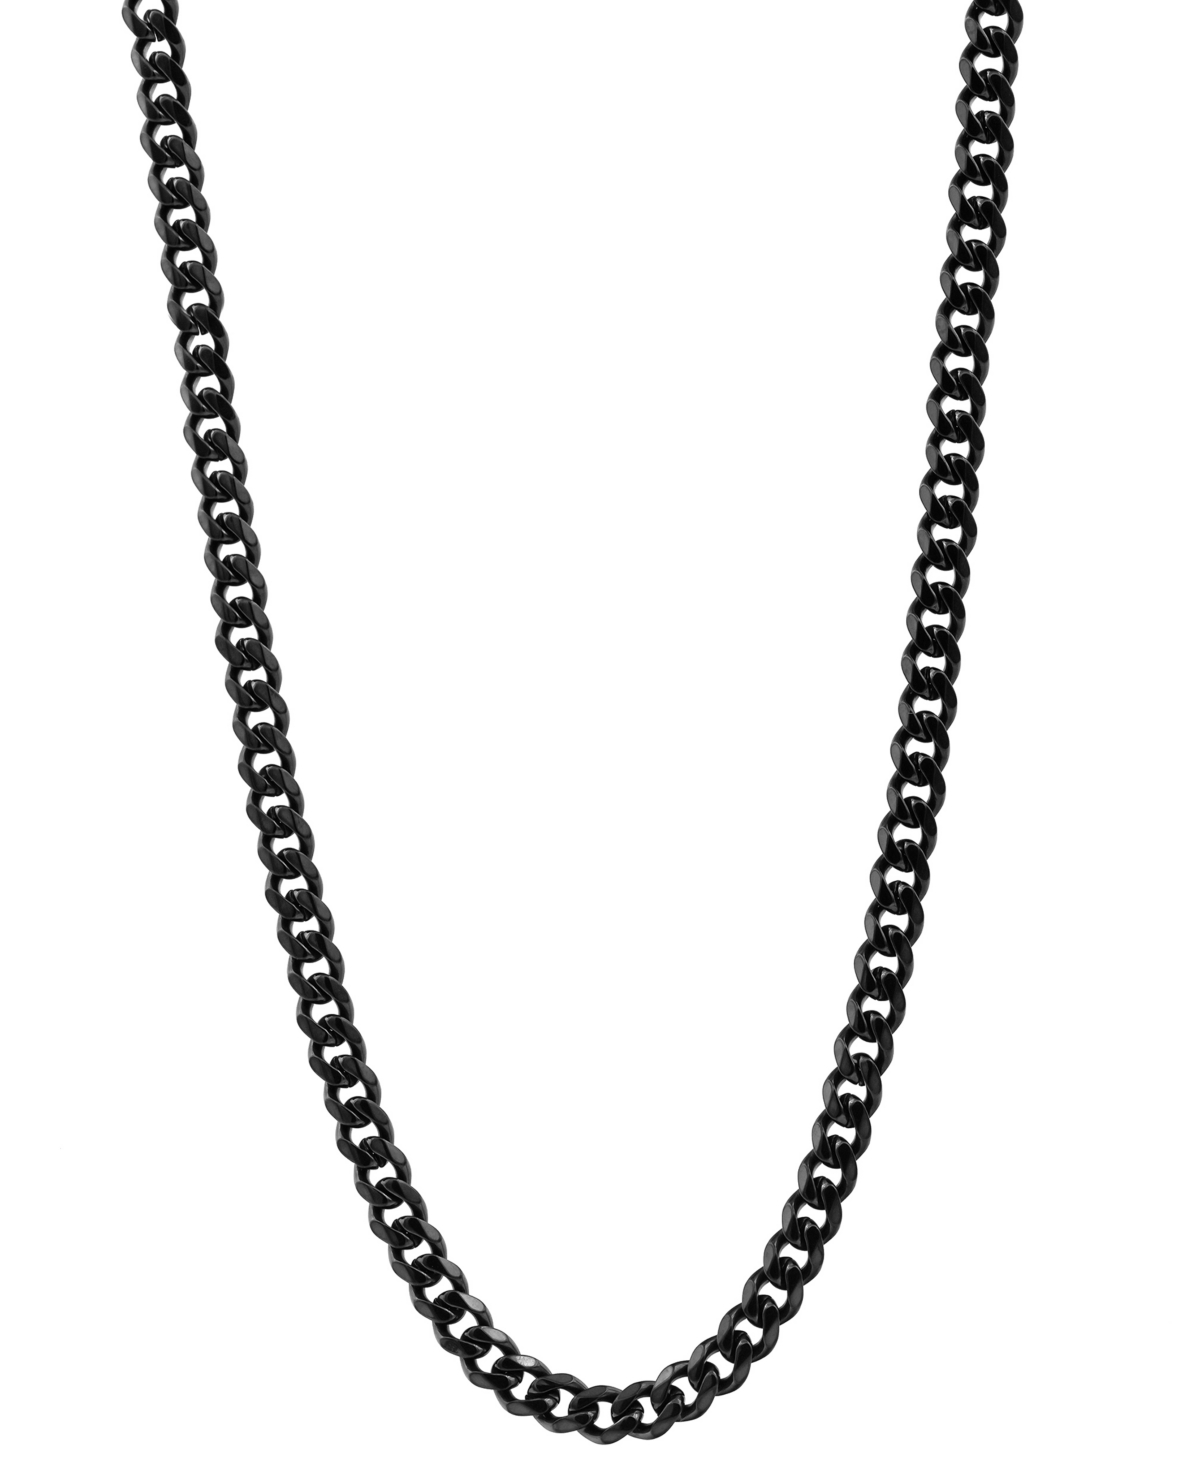 Men's Curb Link 24" Chain Necklace in Black Ion-Plated Stainless Steel - Black